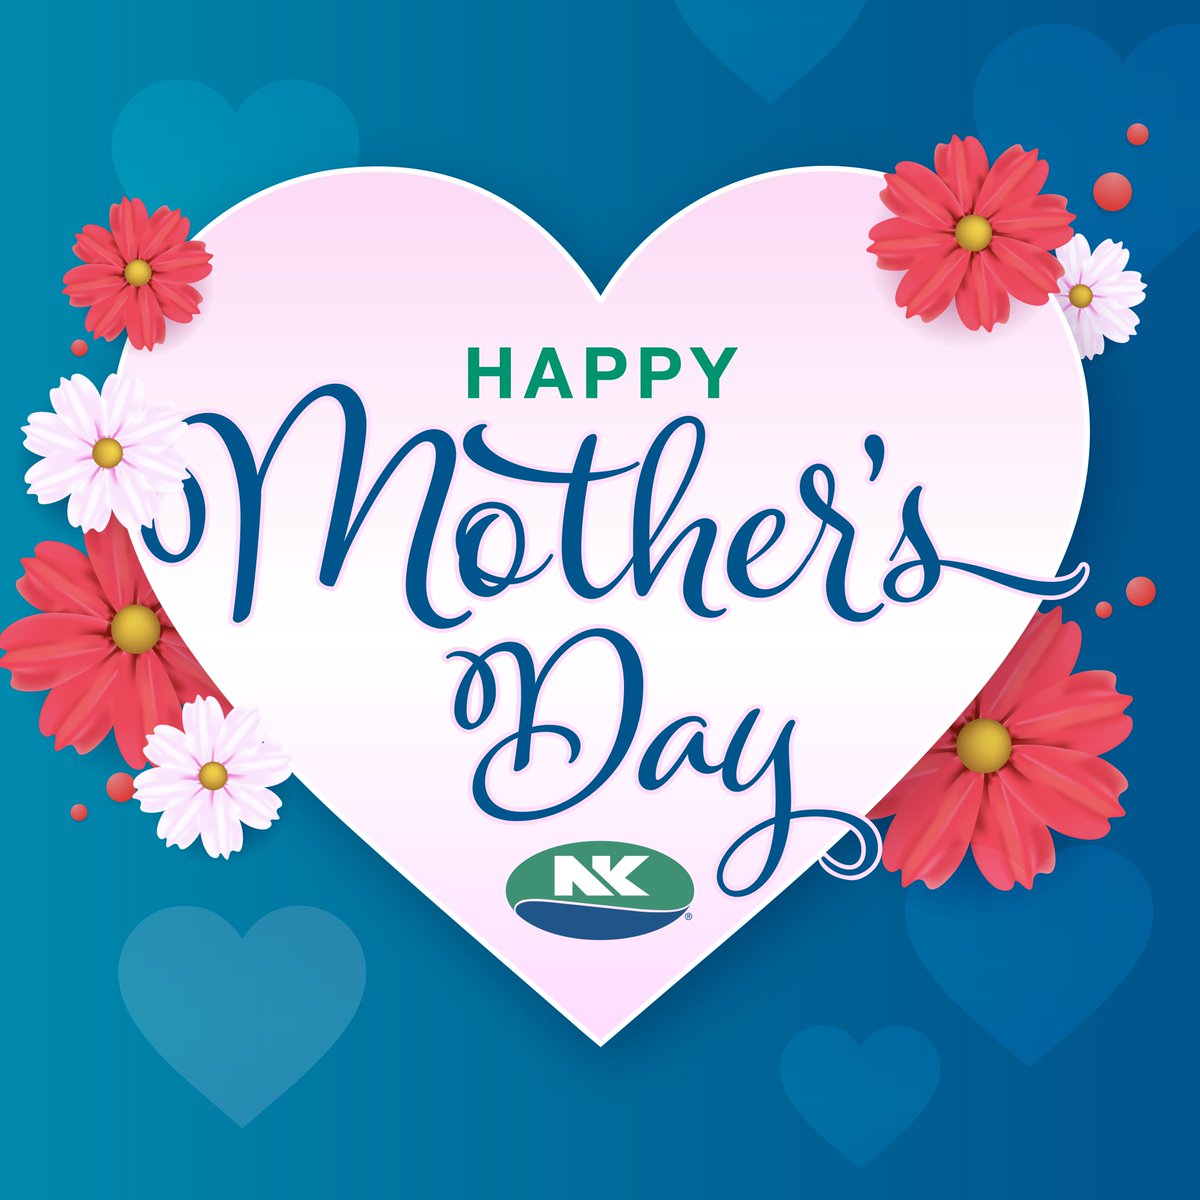 Today we're raising a toast to those who work double duty as moms and NK team members. We hope you can take a break and relax today. Happy Mother's Day! 💙